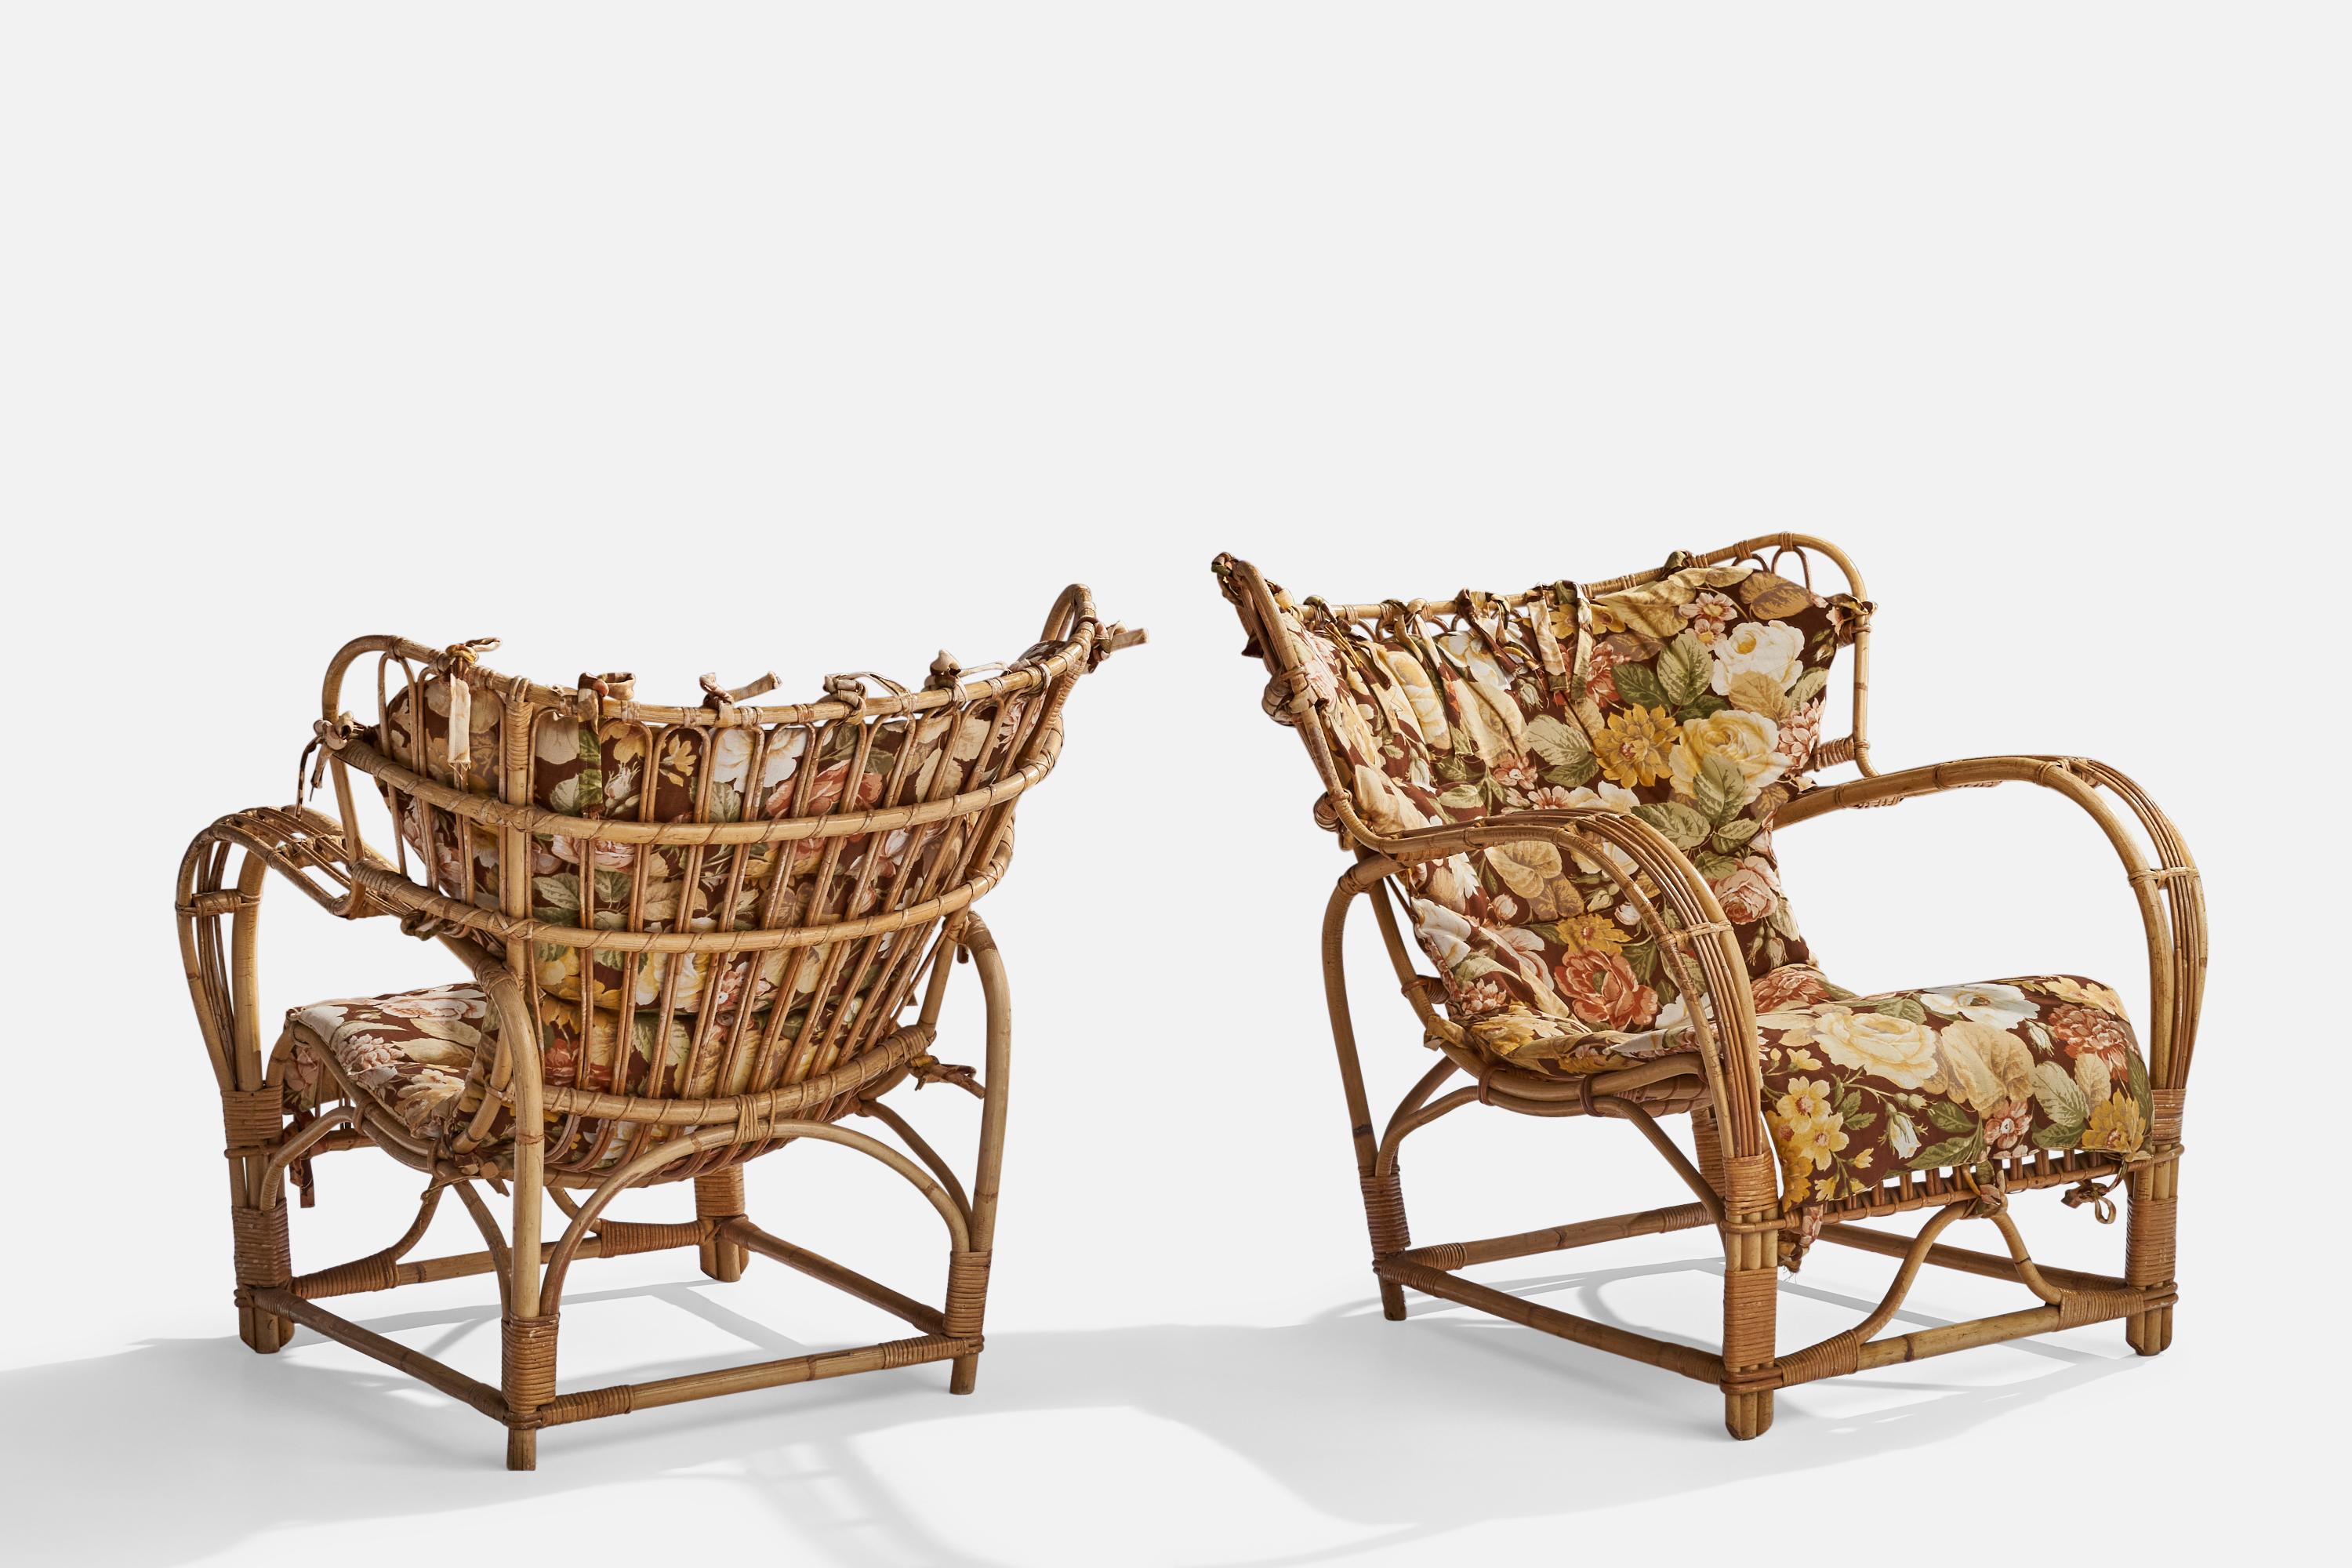 Viggo Boesen, Lounge Chairs, Bamboo, Rattan, Fabric, Sweden, 1940s In Good Condition For Sale In High Point, NC